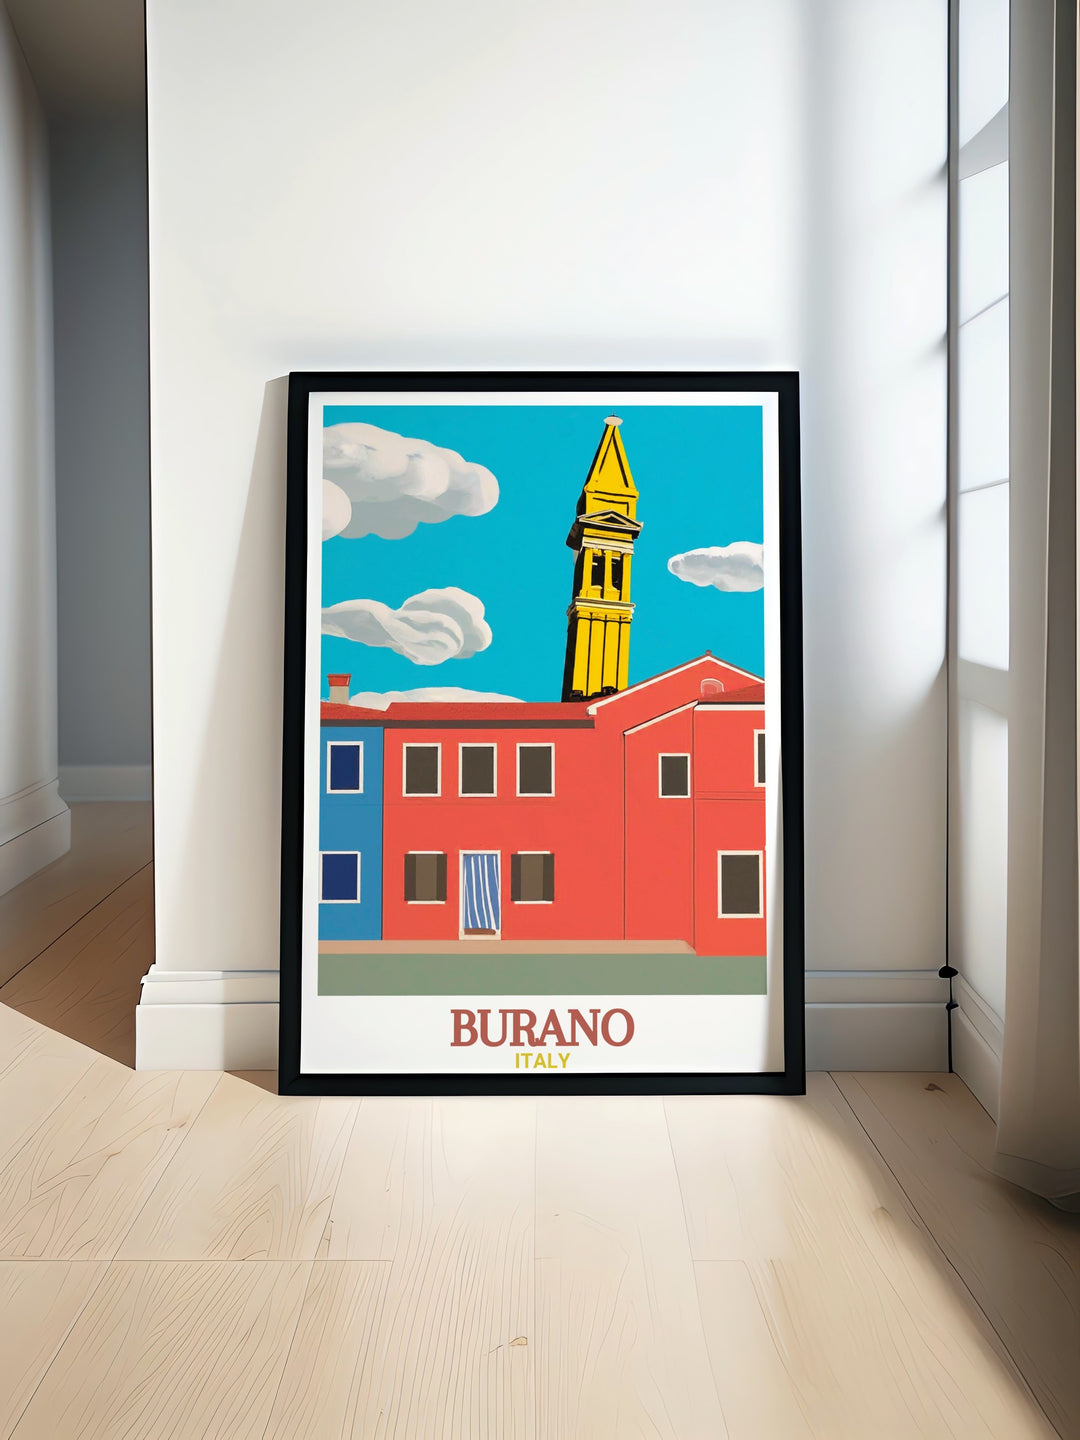 Burano Cityscape with vibrant colorful houses and the historic San Martino Church. This Burano Poster brings Italian charm to your home decor making it a stunning piece of wall art for any room.